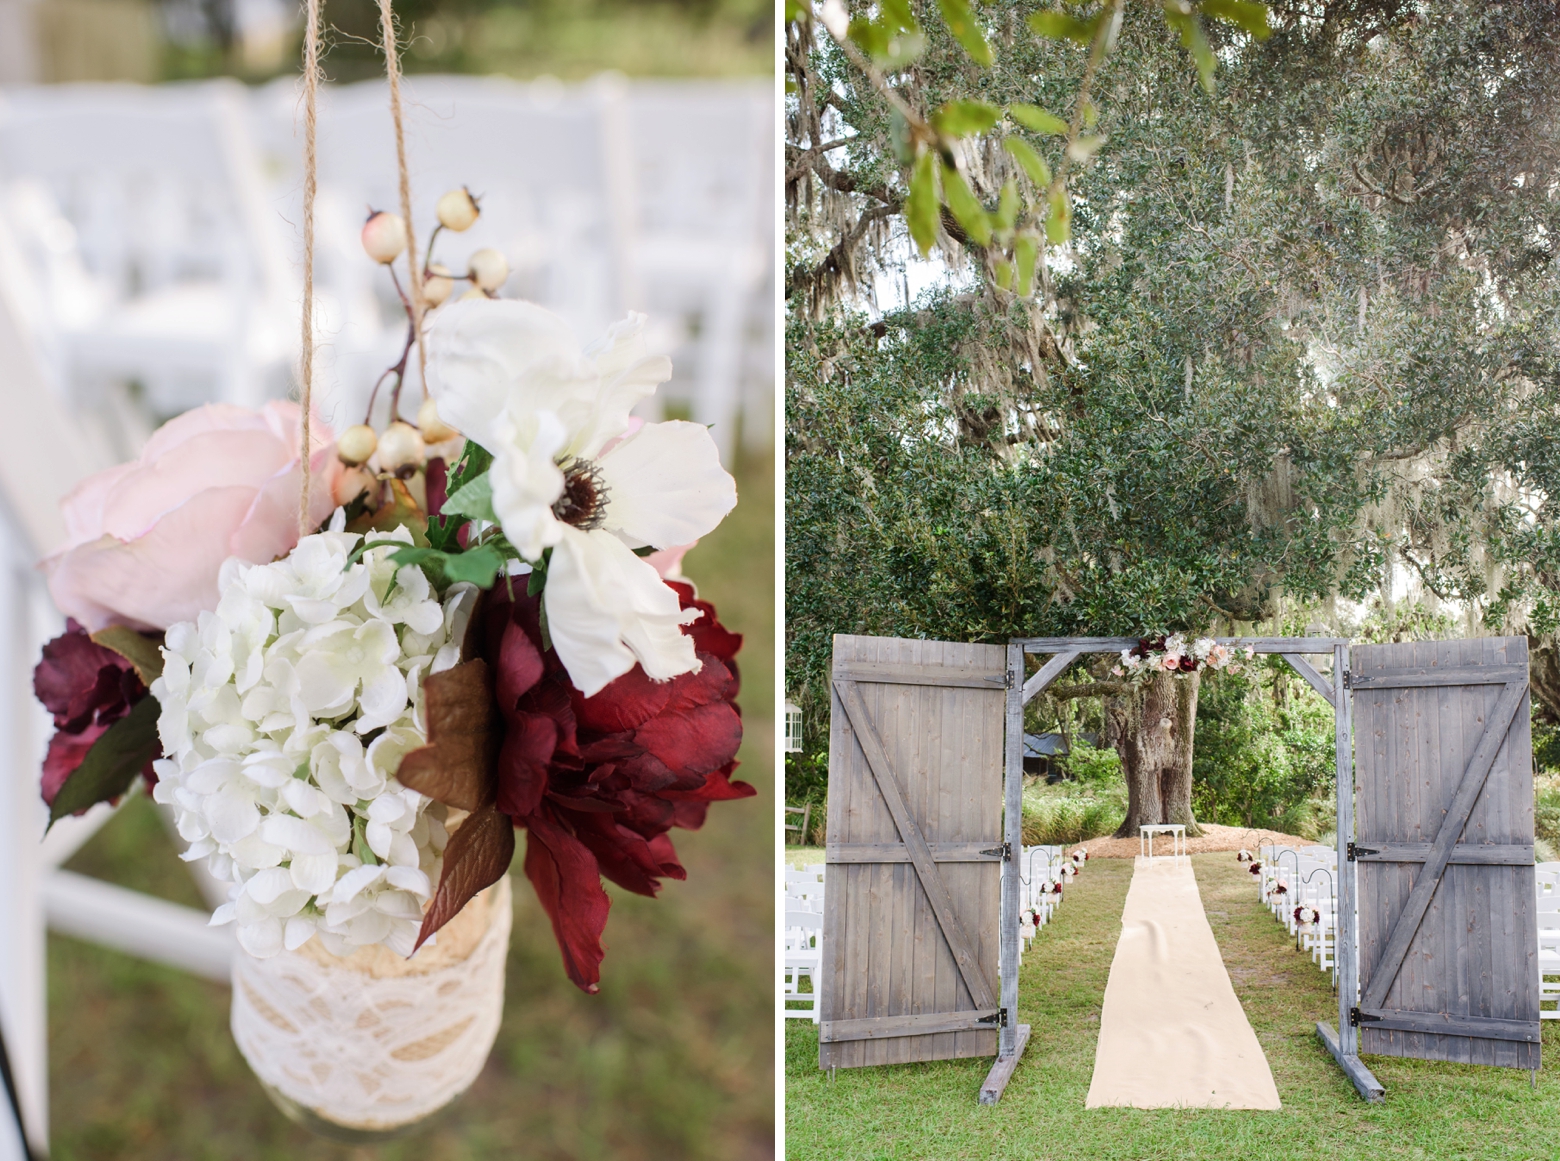 The wedding ceremony details including a mason jar filled with flowers and some barn doors leading to the aisle